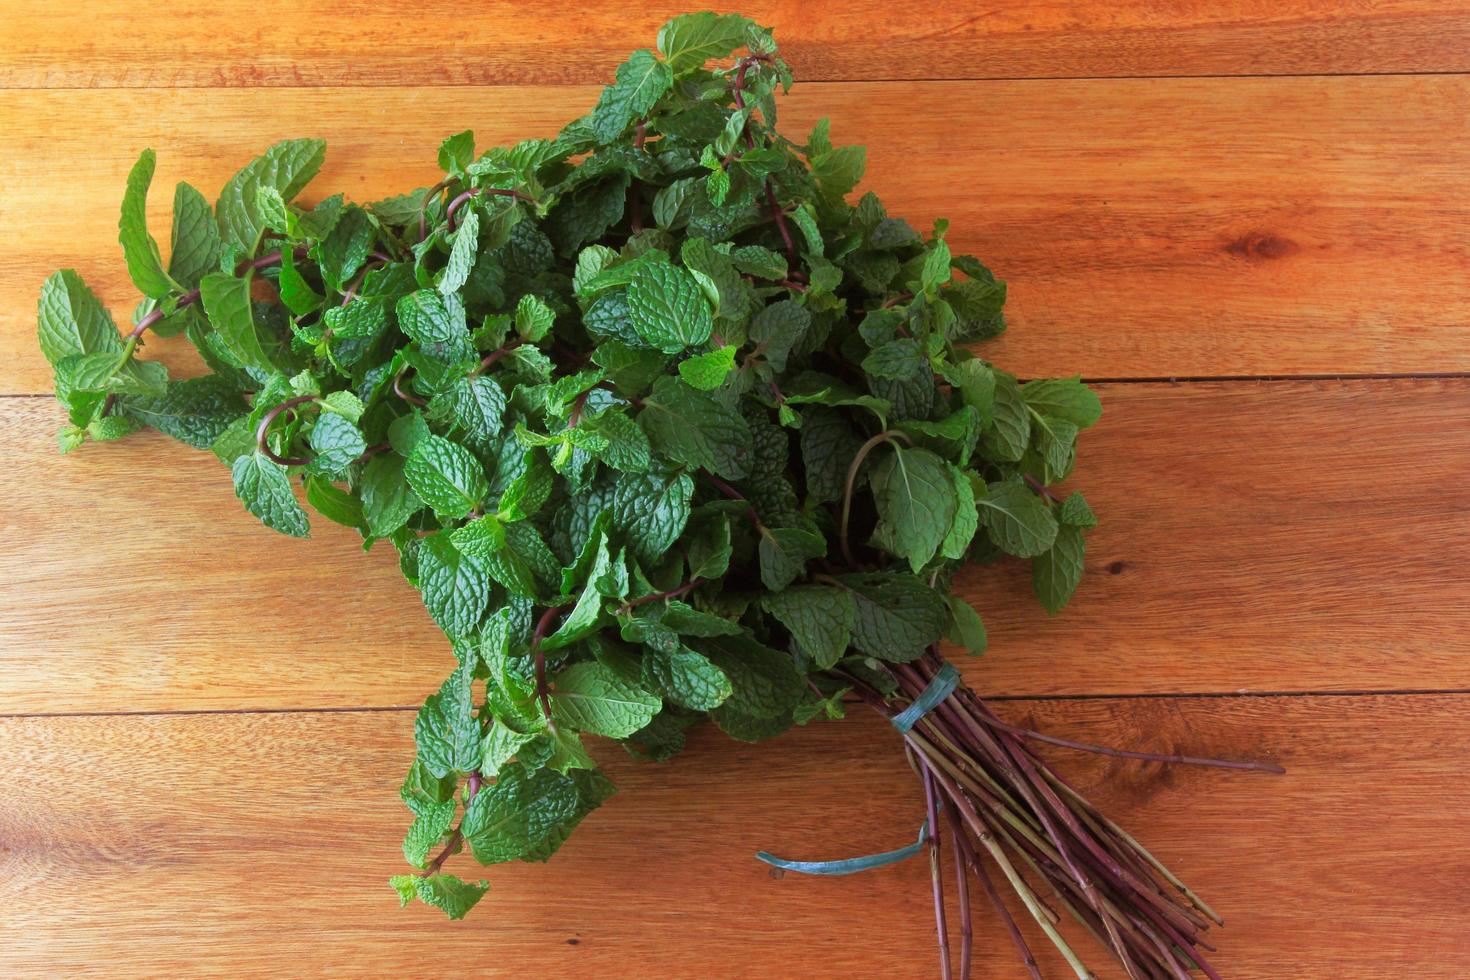 Group of fresh organic green mint on rustic wooden table. Aromatic peppermint with medicinal and culinary uses photo